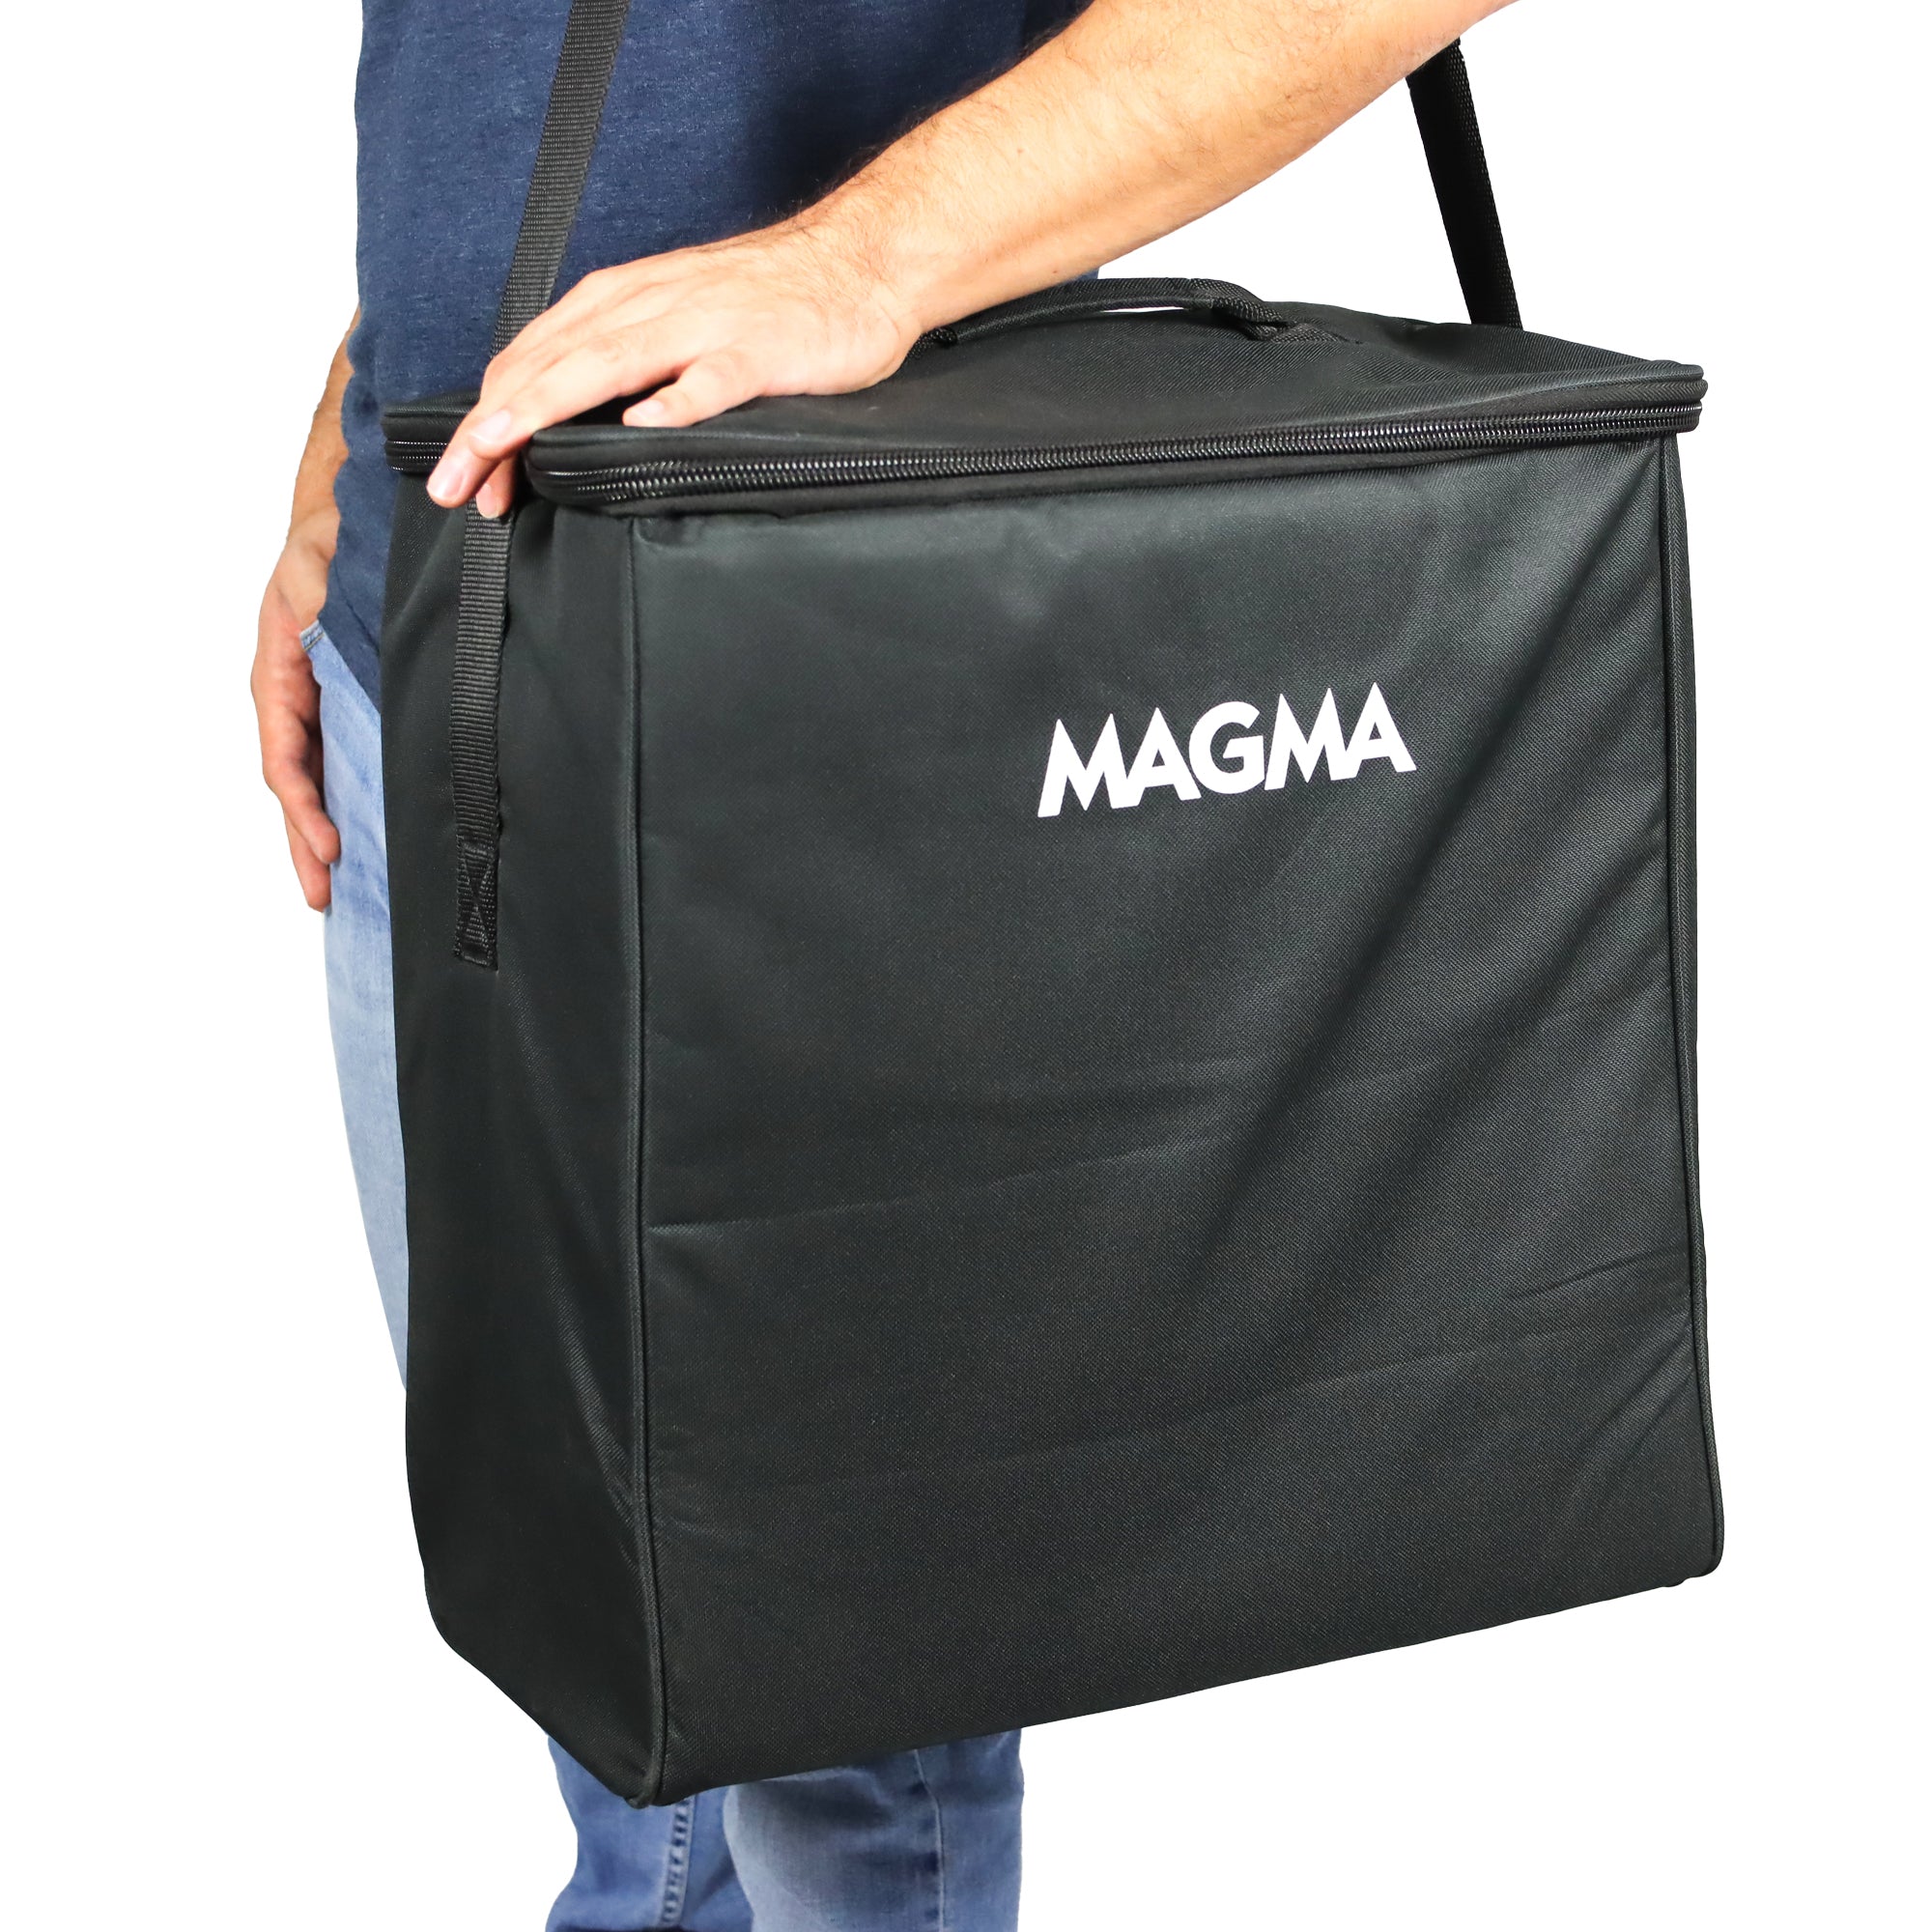 Magma Storage Carry Case Fits 12in x 24in Rectangular Grills